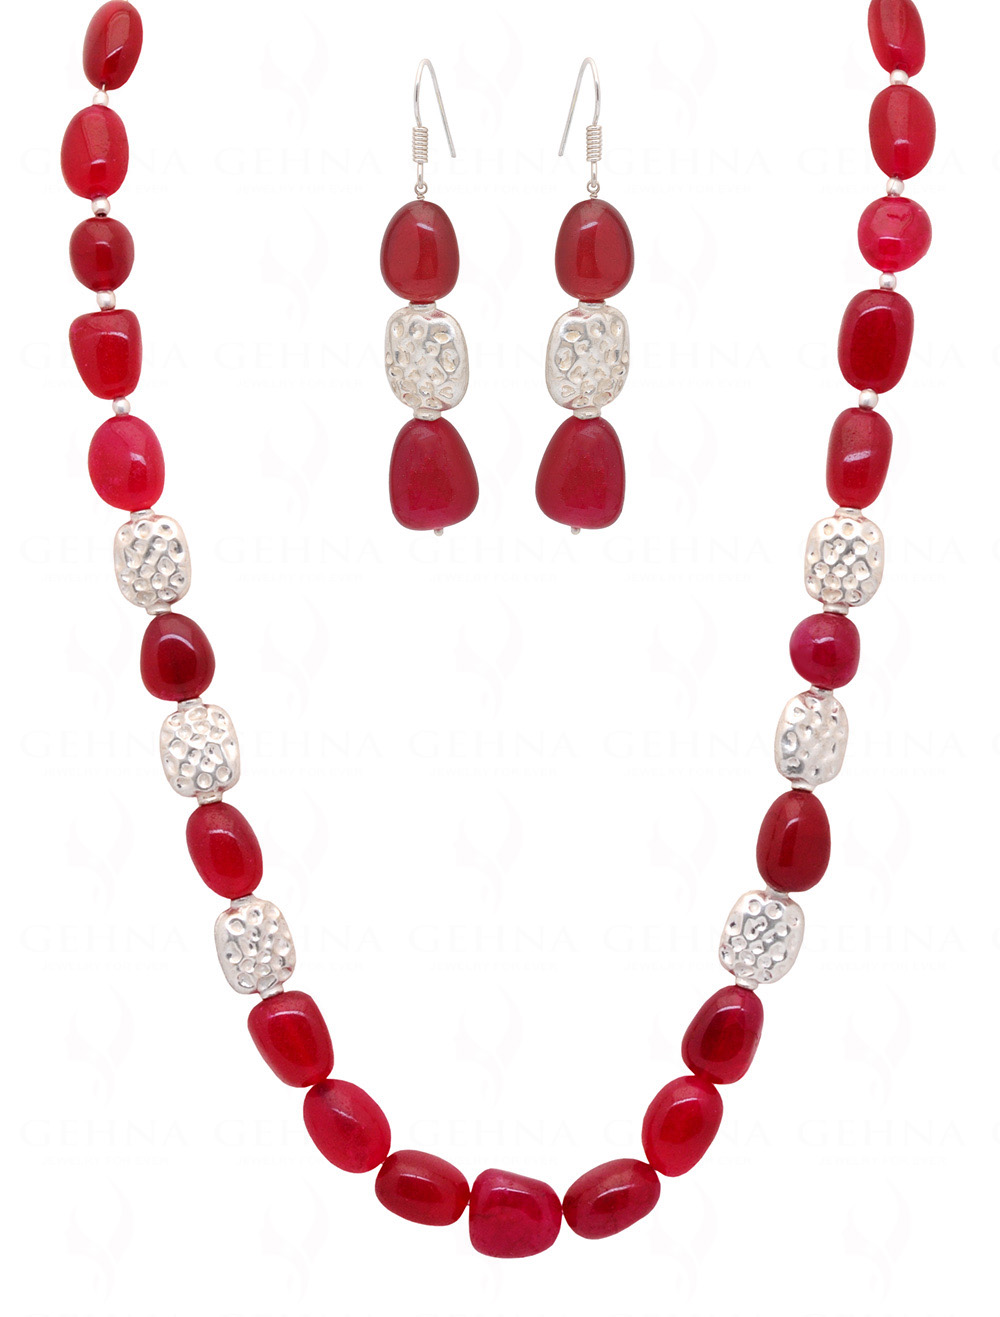 Chalcedony Tumble With Silver Plated Spacer Beads Necklace Set FN-1073